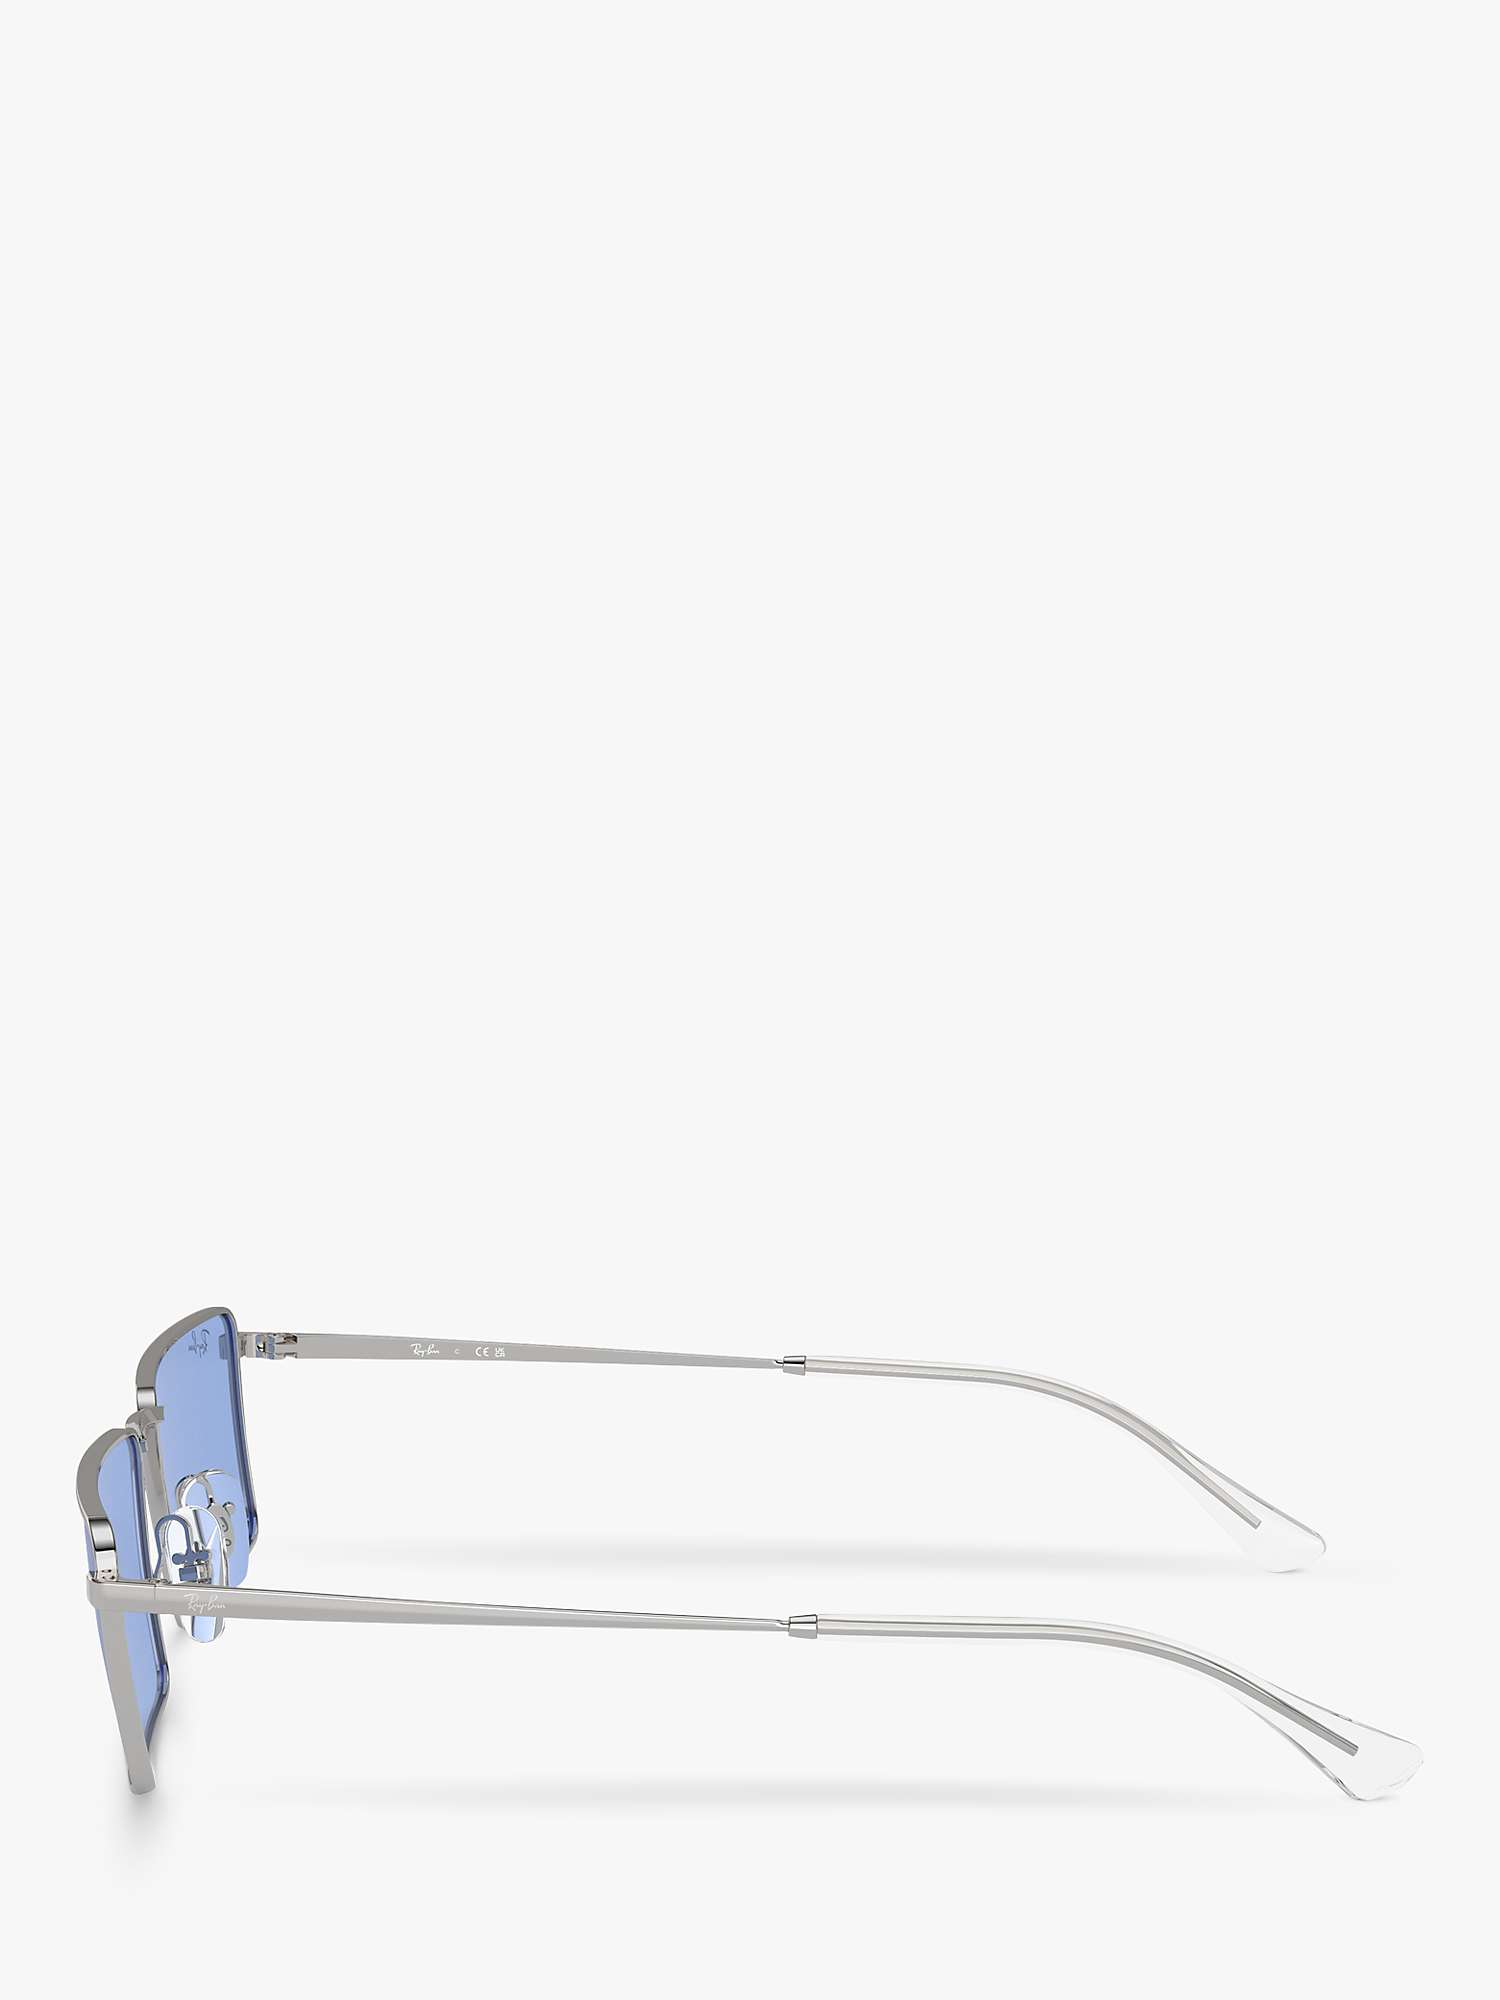 Buy Ray-Ban RB3741 Unisex Rectangular Sunglasses, Silver/Blue Online at johnlewis.com